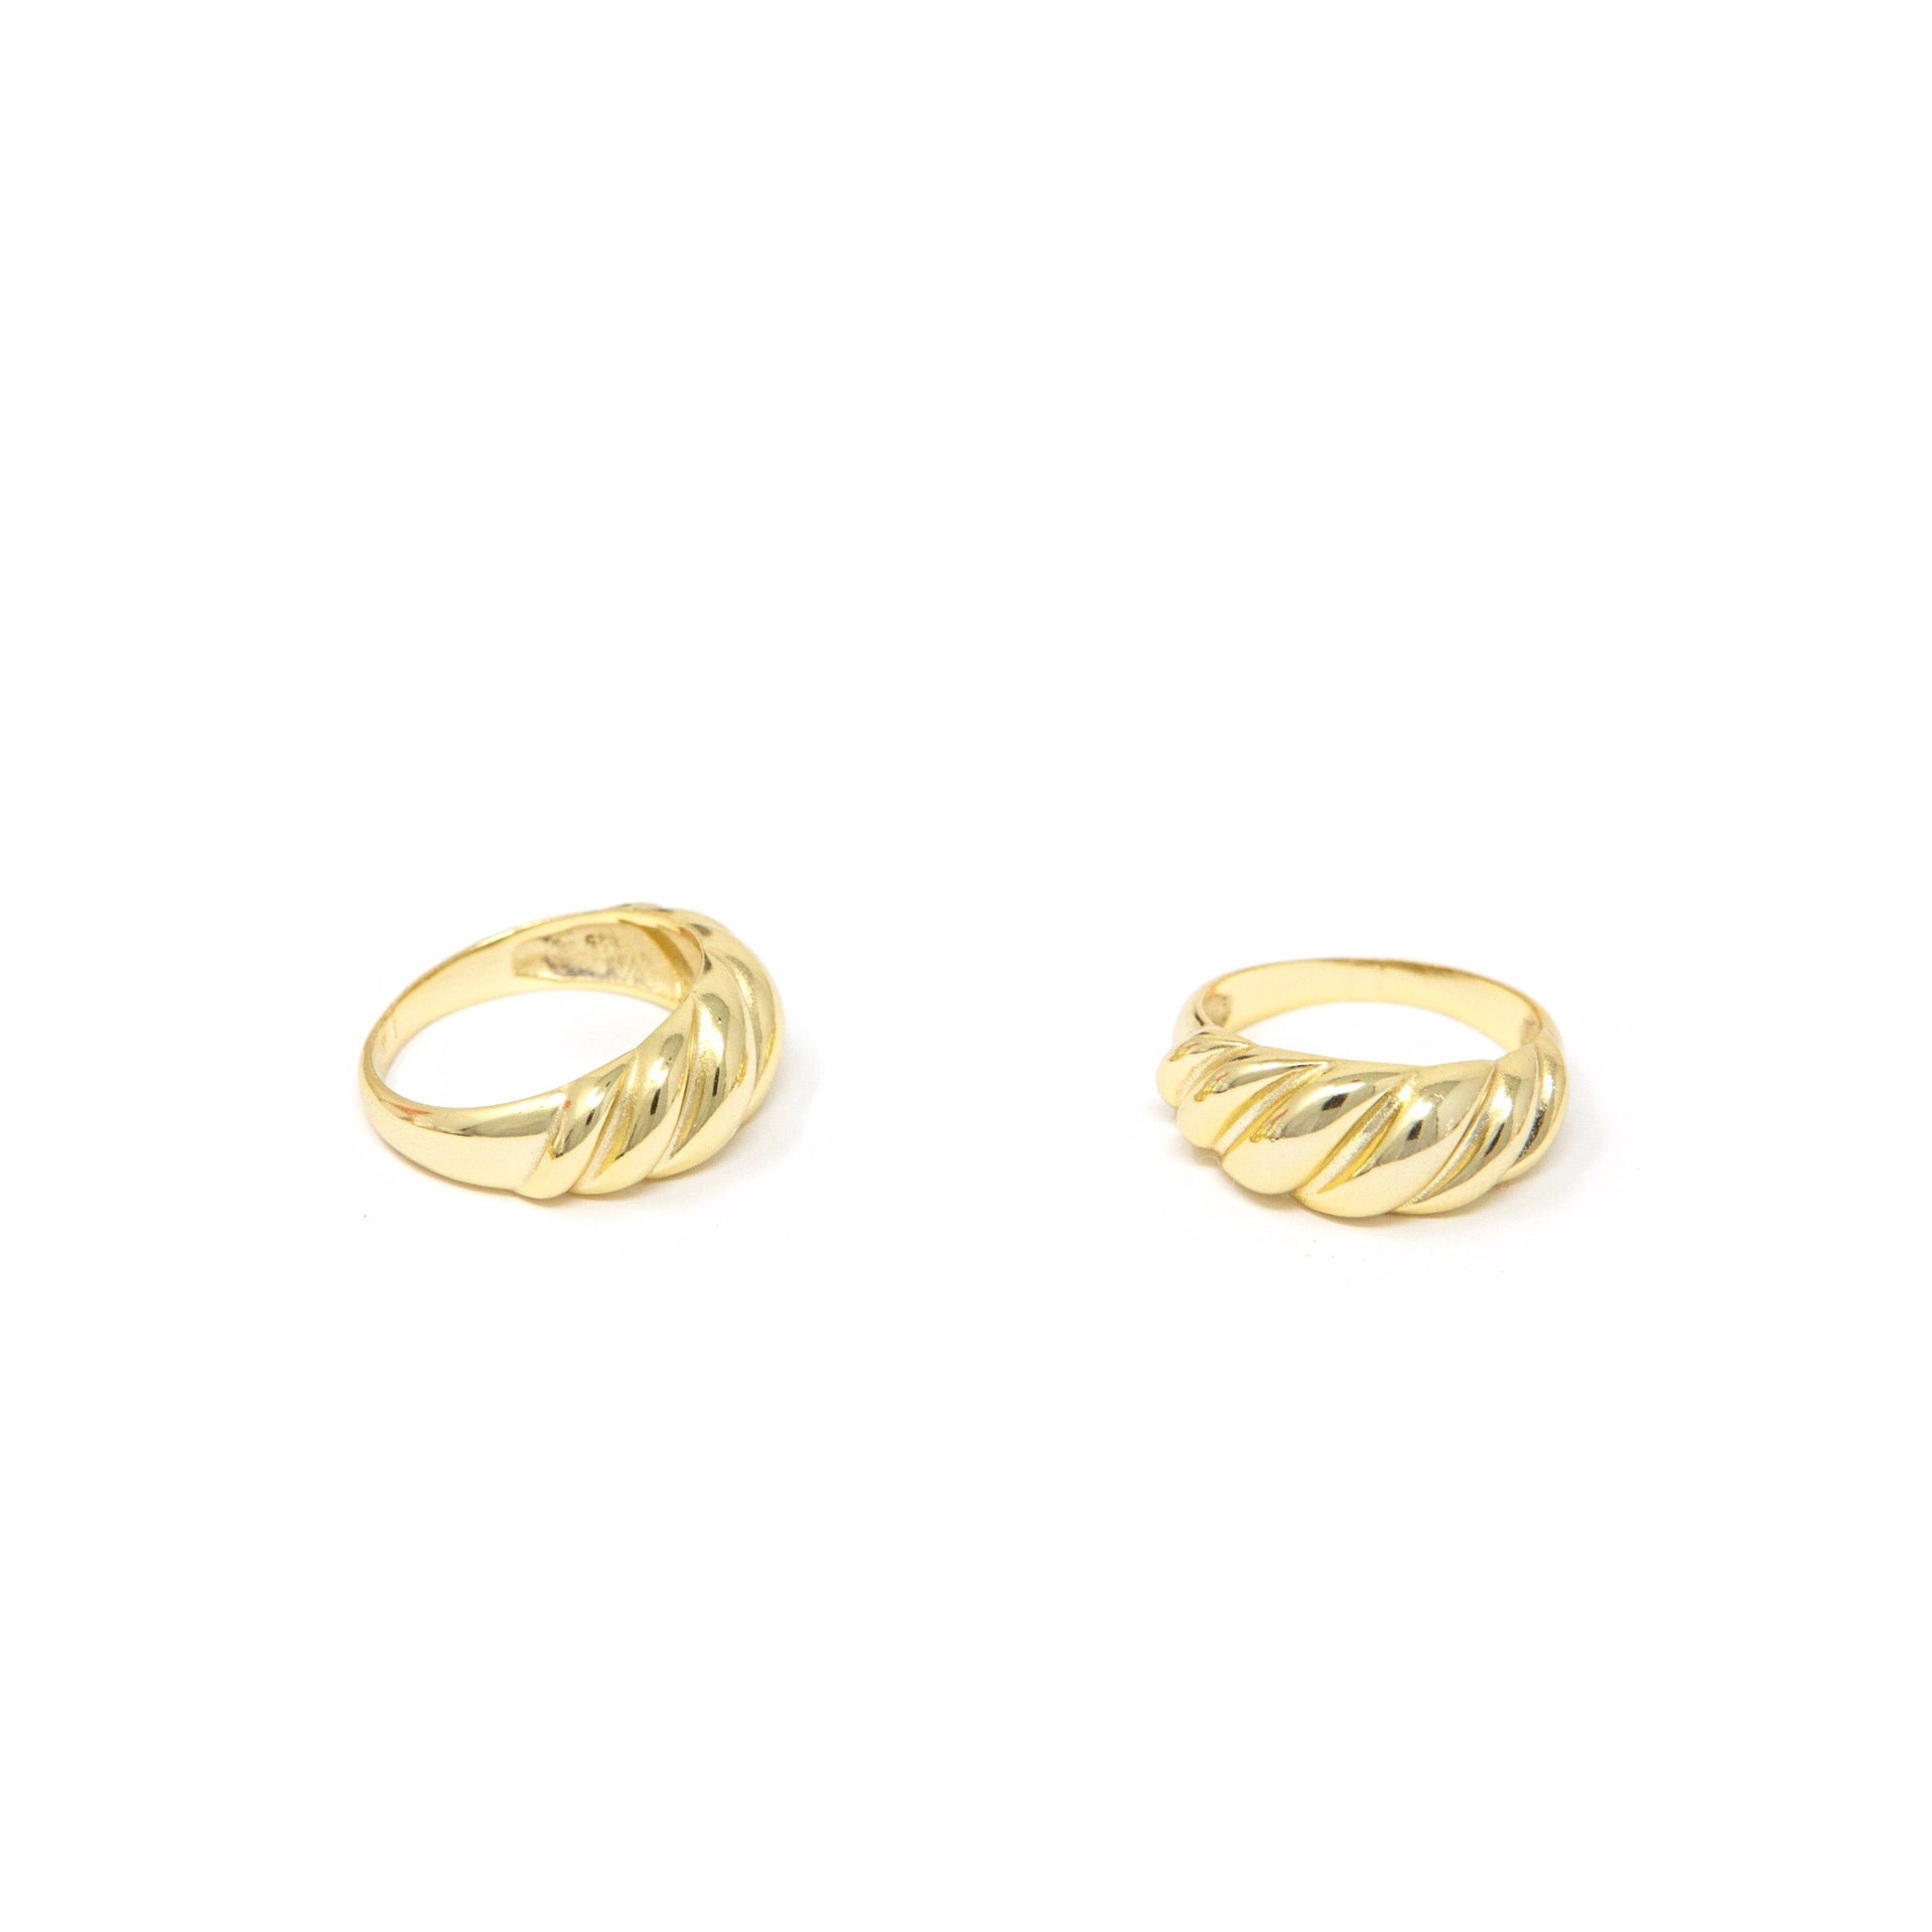 Dome and Twist Gold Rings JEWELRY The Sis Kiss Twist 6